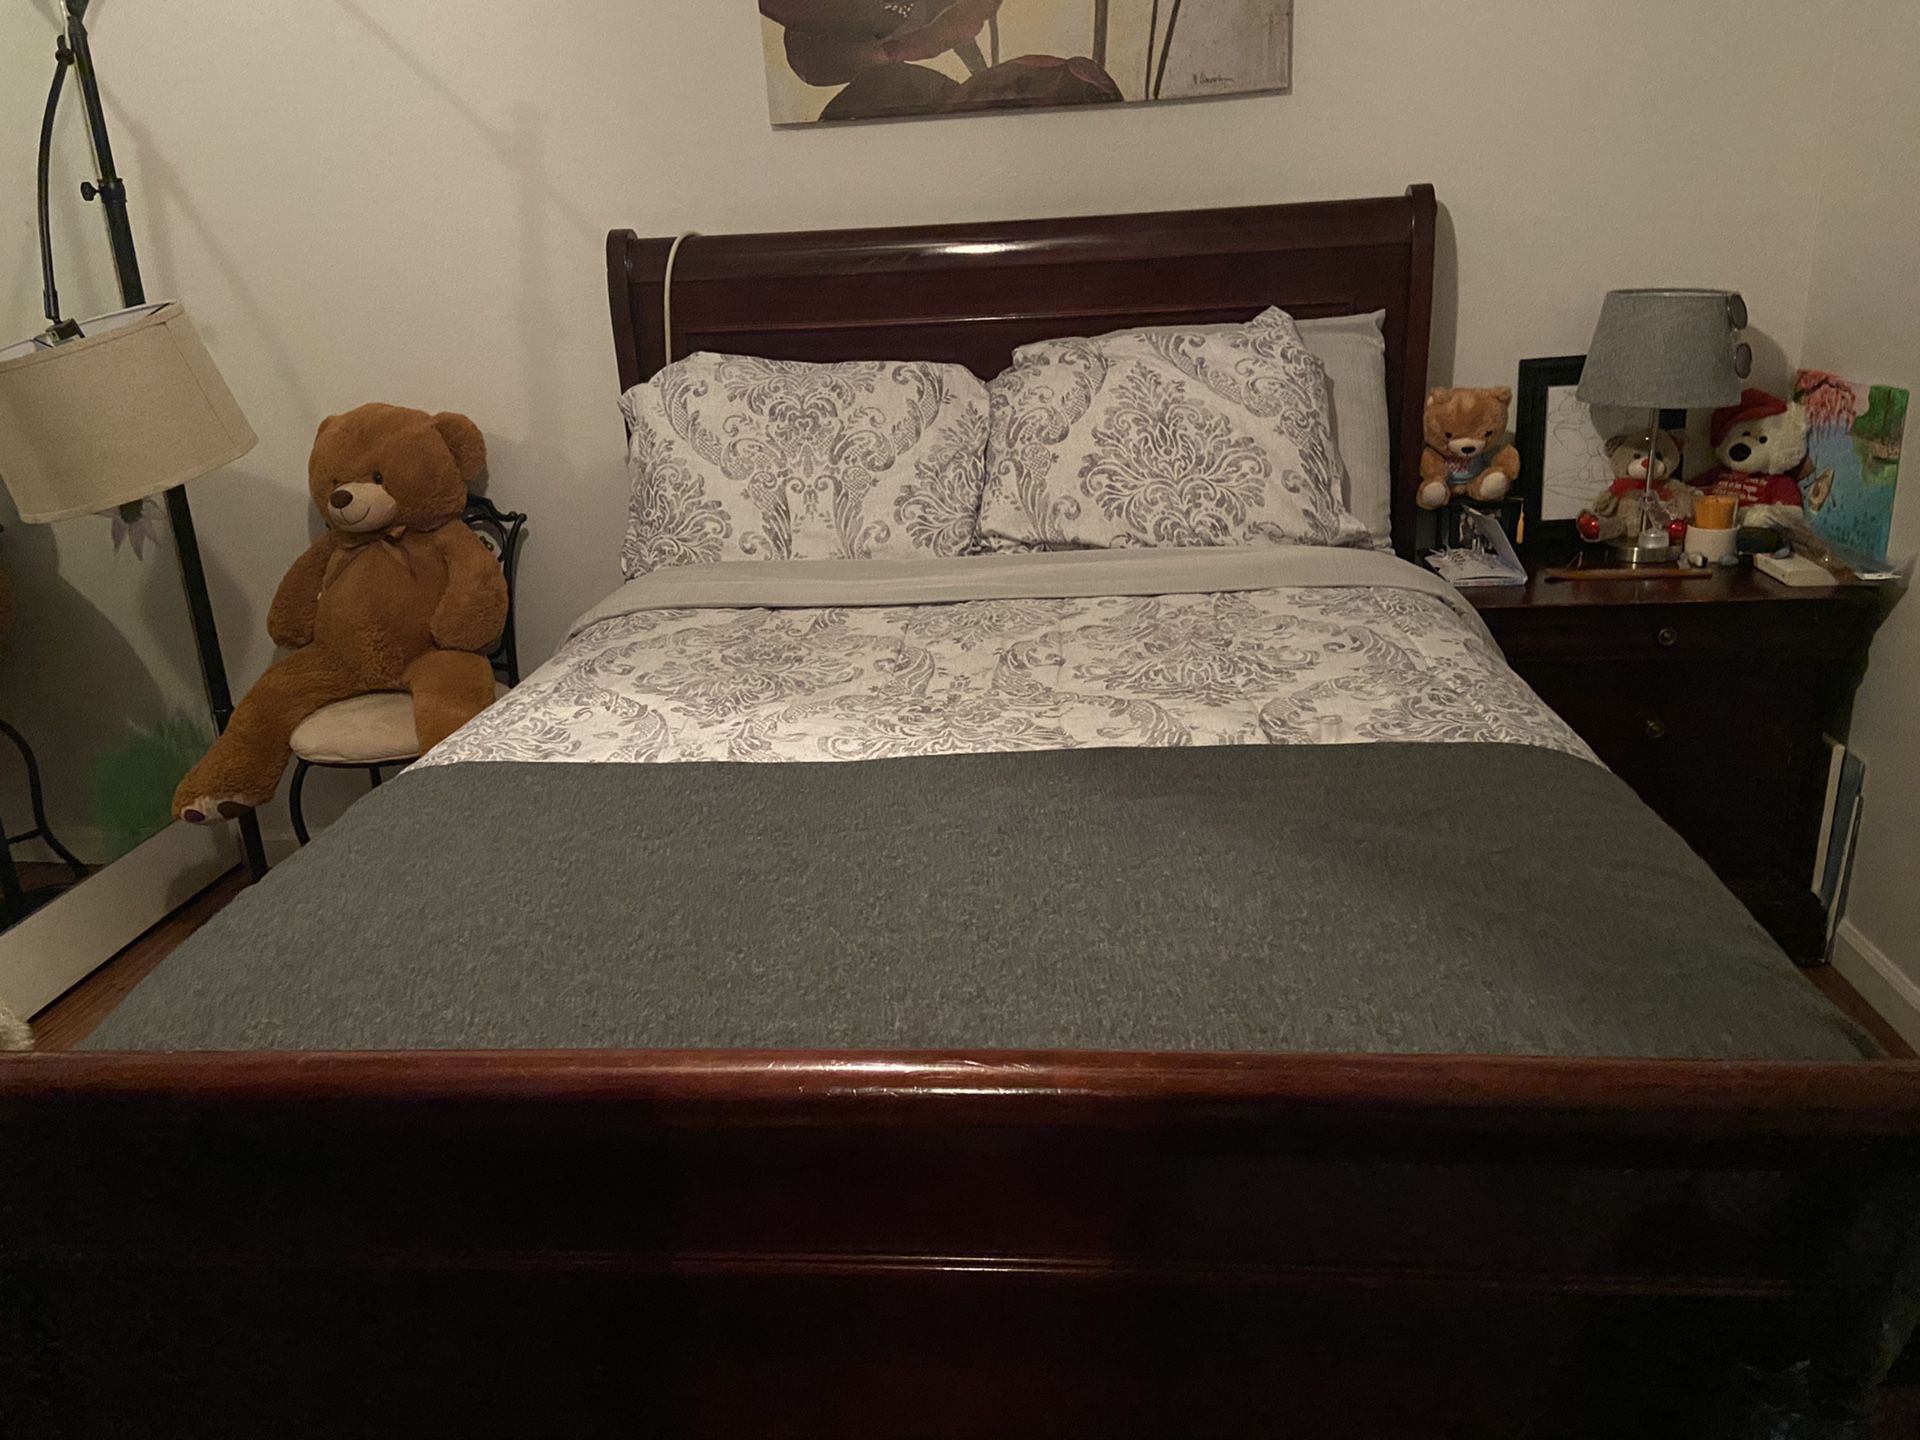 Full bed frame with night stand and dresser